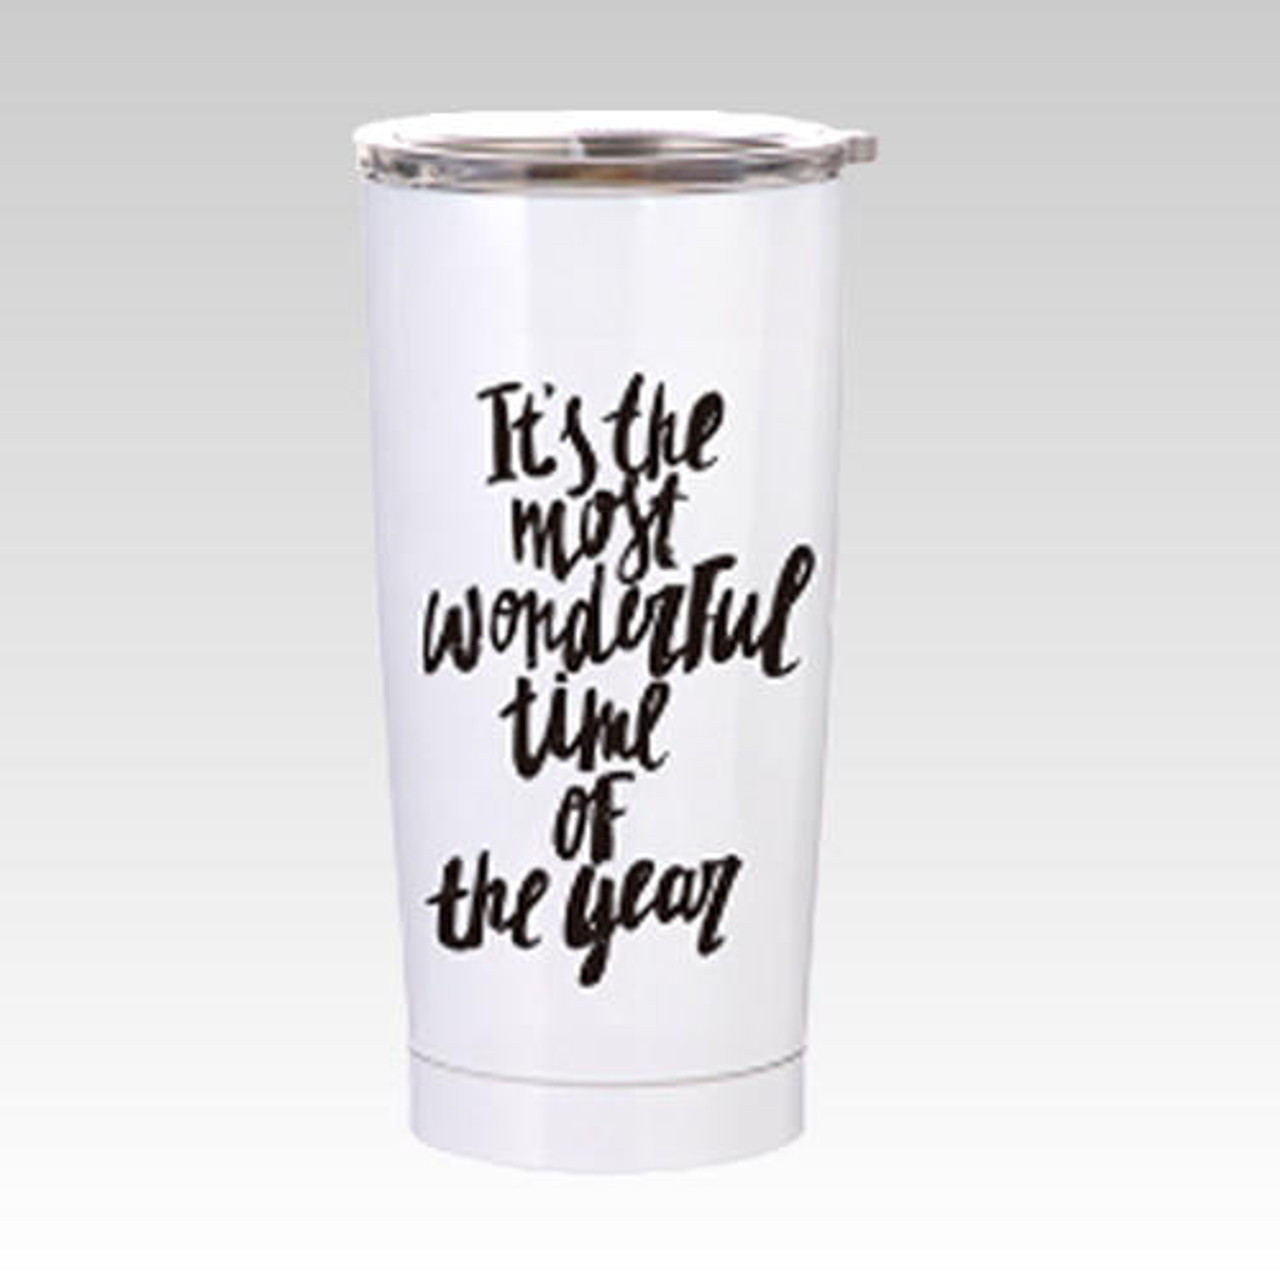 https://cdn11.bigcommerce.com/s-et4qthkygq/images/stencil/1280x1280/products/5519/37569/walablanks-stainless-steel-tumbler-20-oz__60821.1668366042.jpg?c=2